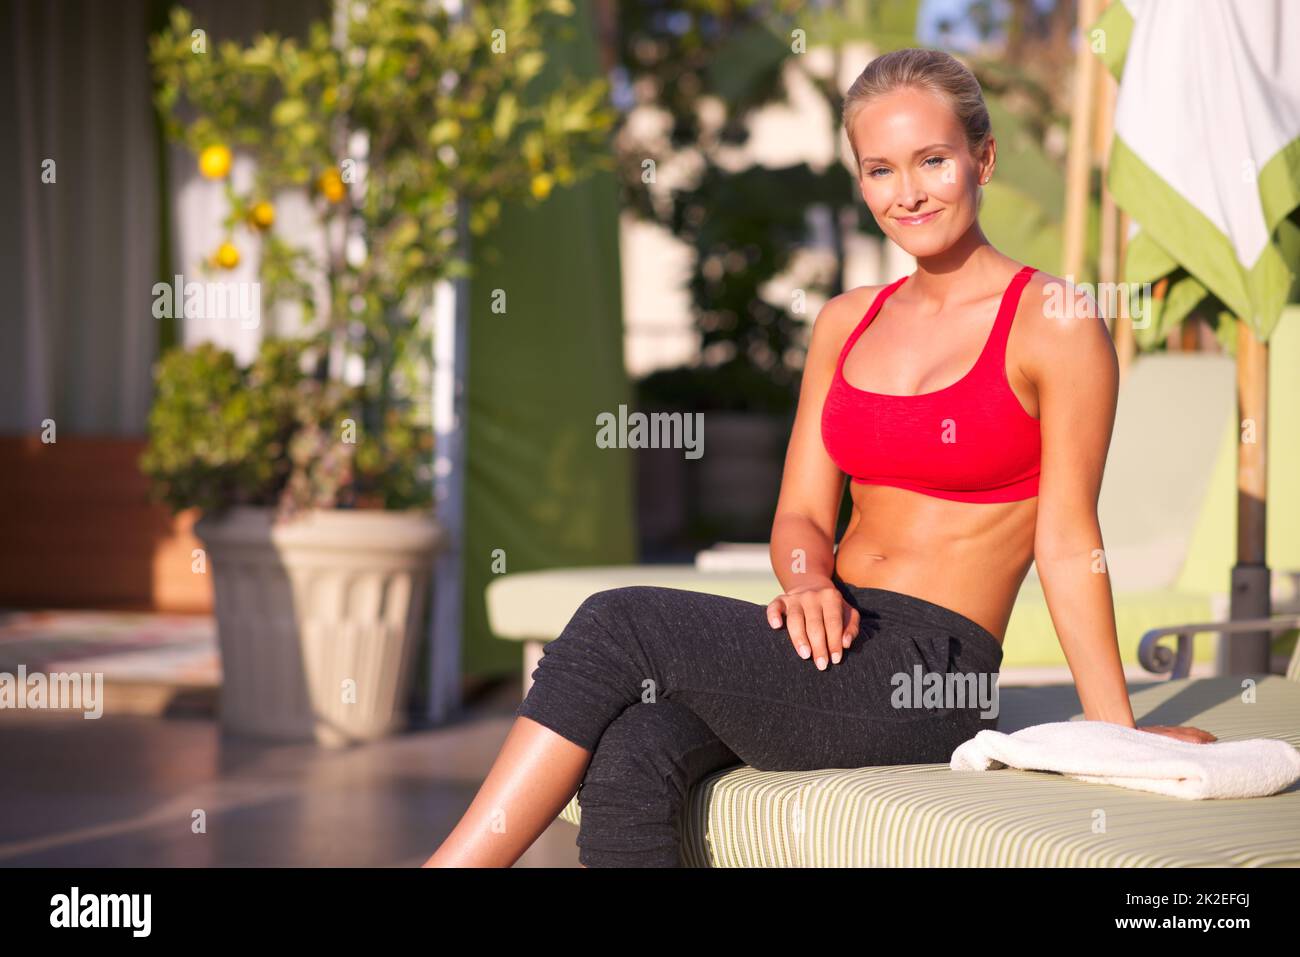 Fitness is something to smile about. Portrait of an attractive woman in sports wear sitting outside. Stock Photo